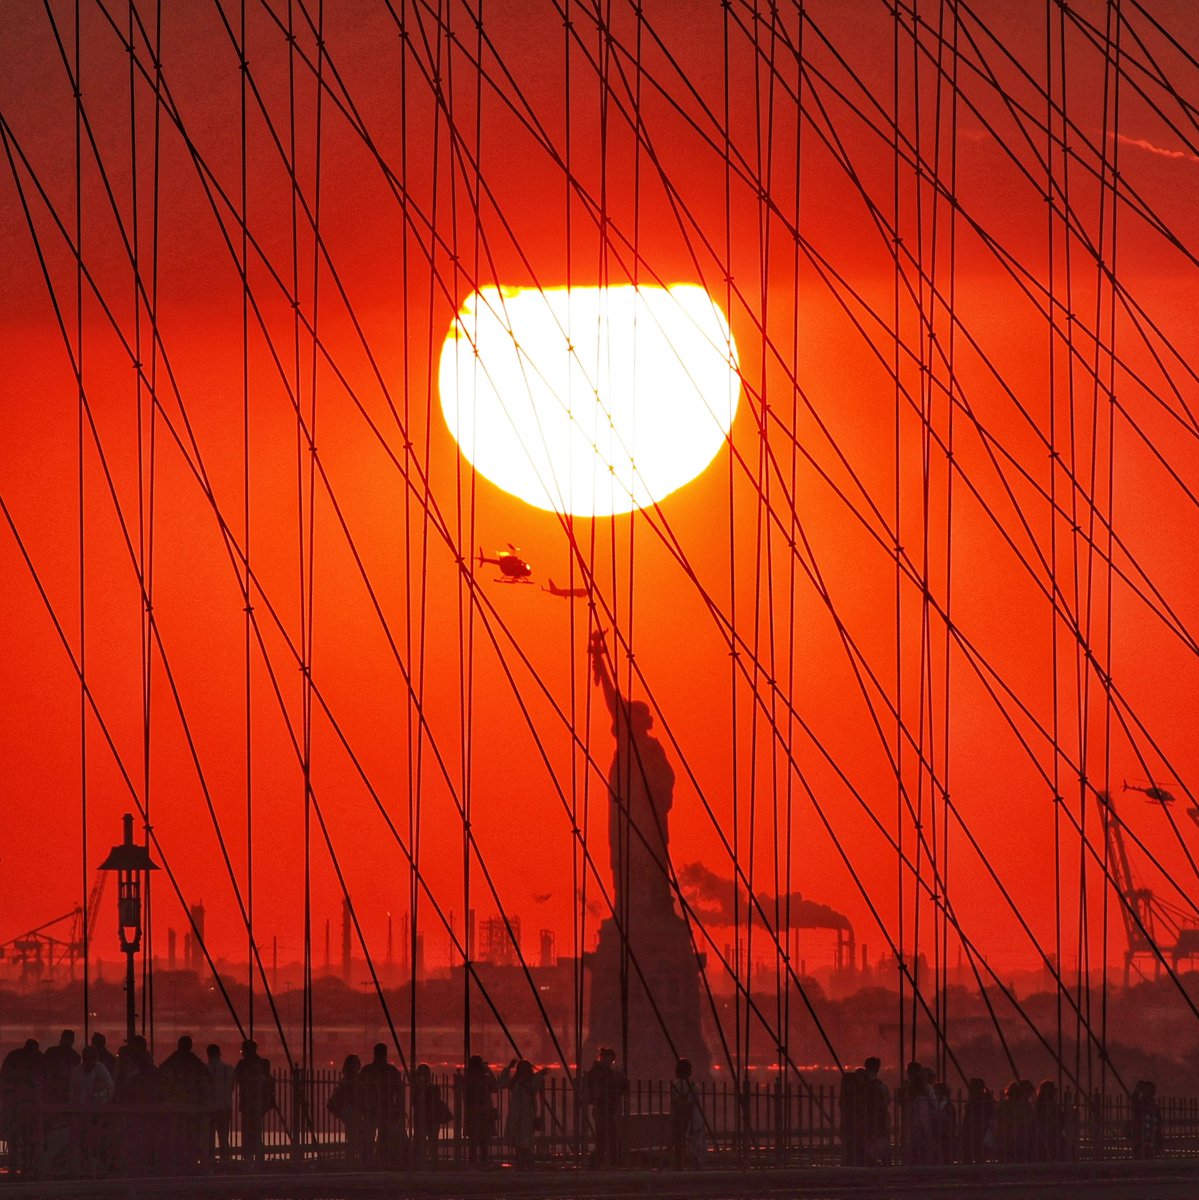 The sun sets behind the Brooklyn Bridge and Statue of Liberty in New York City, Sunday evening #newyork #newyorkcity #nyc #brooklynbridge #statueofliberty #sunset